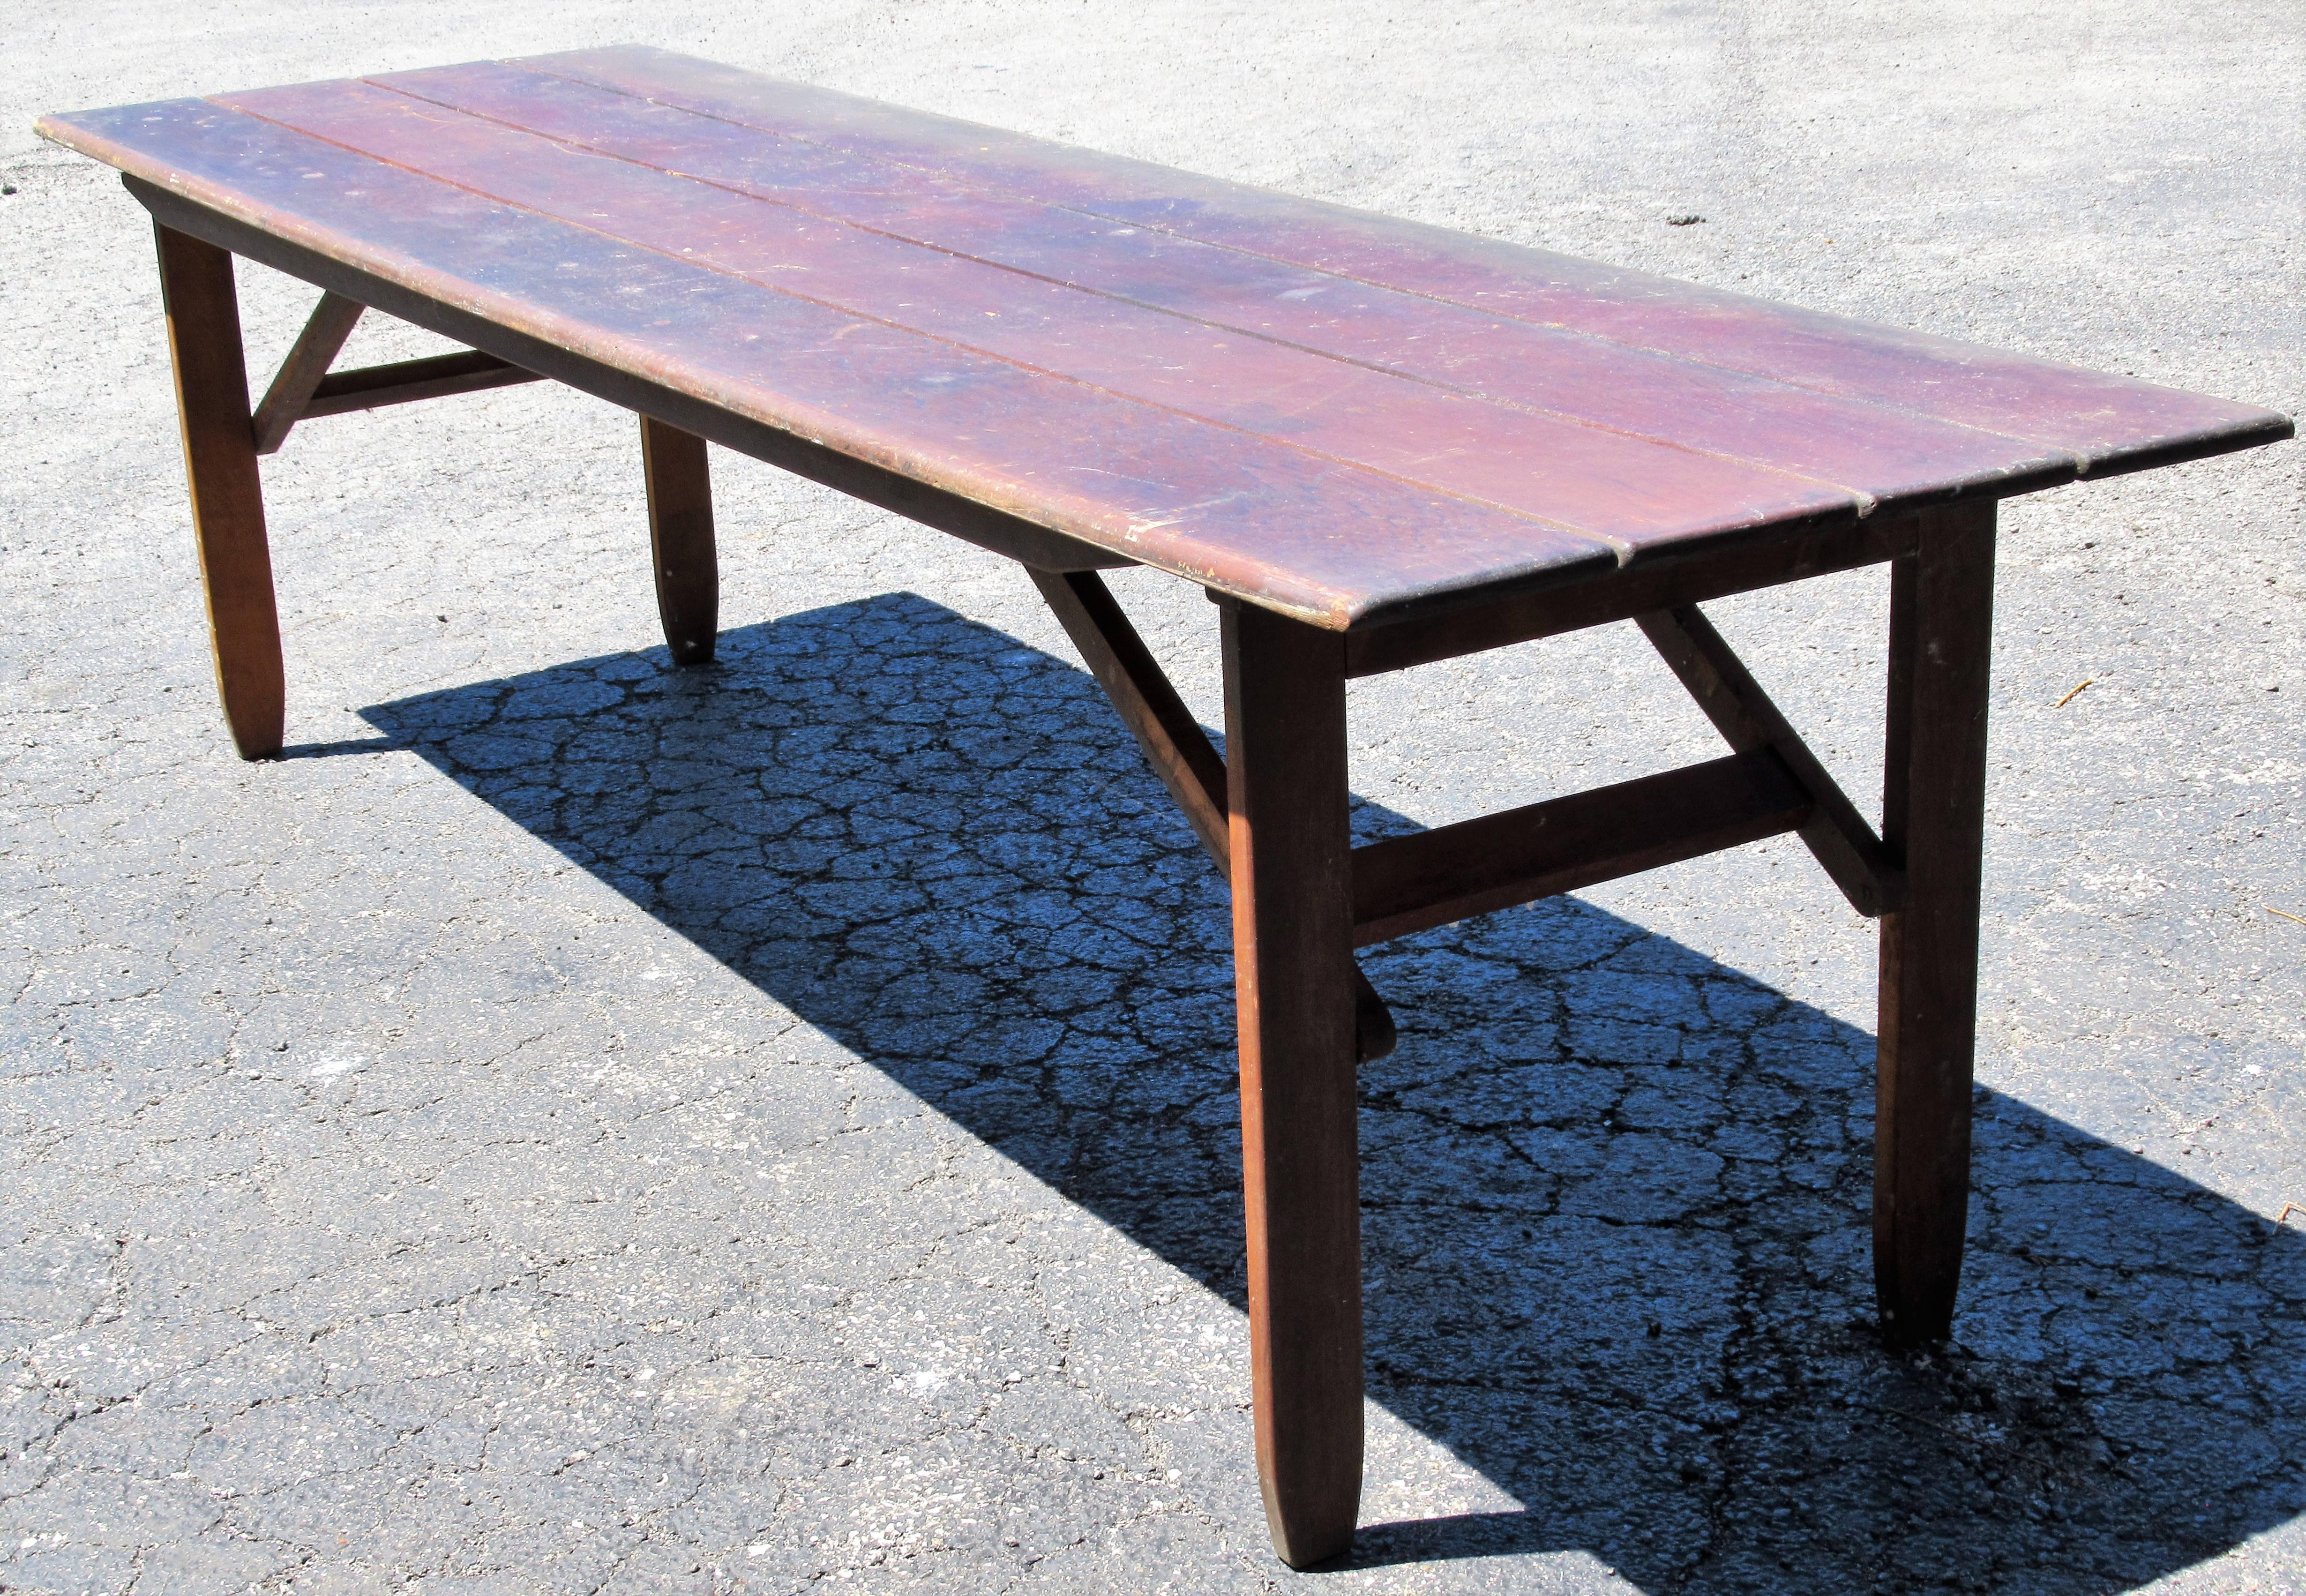 Nine foot long collapsible fold under leg harvest refectory campaign style dining table with nicely aged color patina to wood. Great form and a beautifully constructed custom designed table made by a skilled woodworker craftsmen about 50-60 years